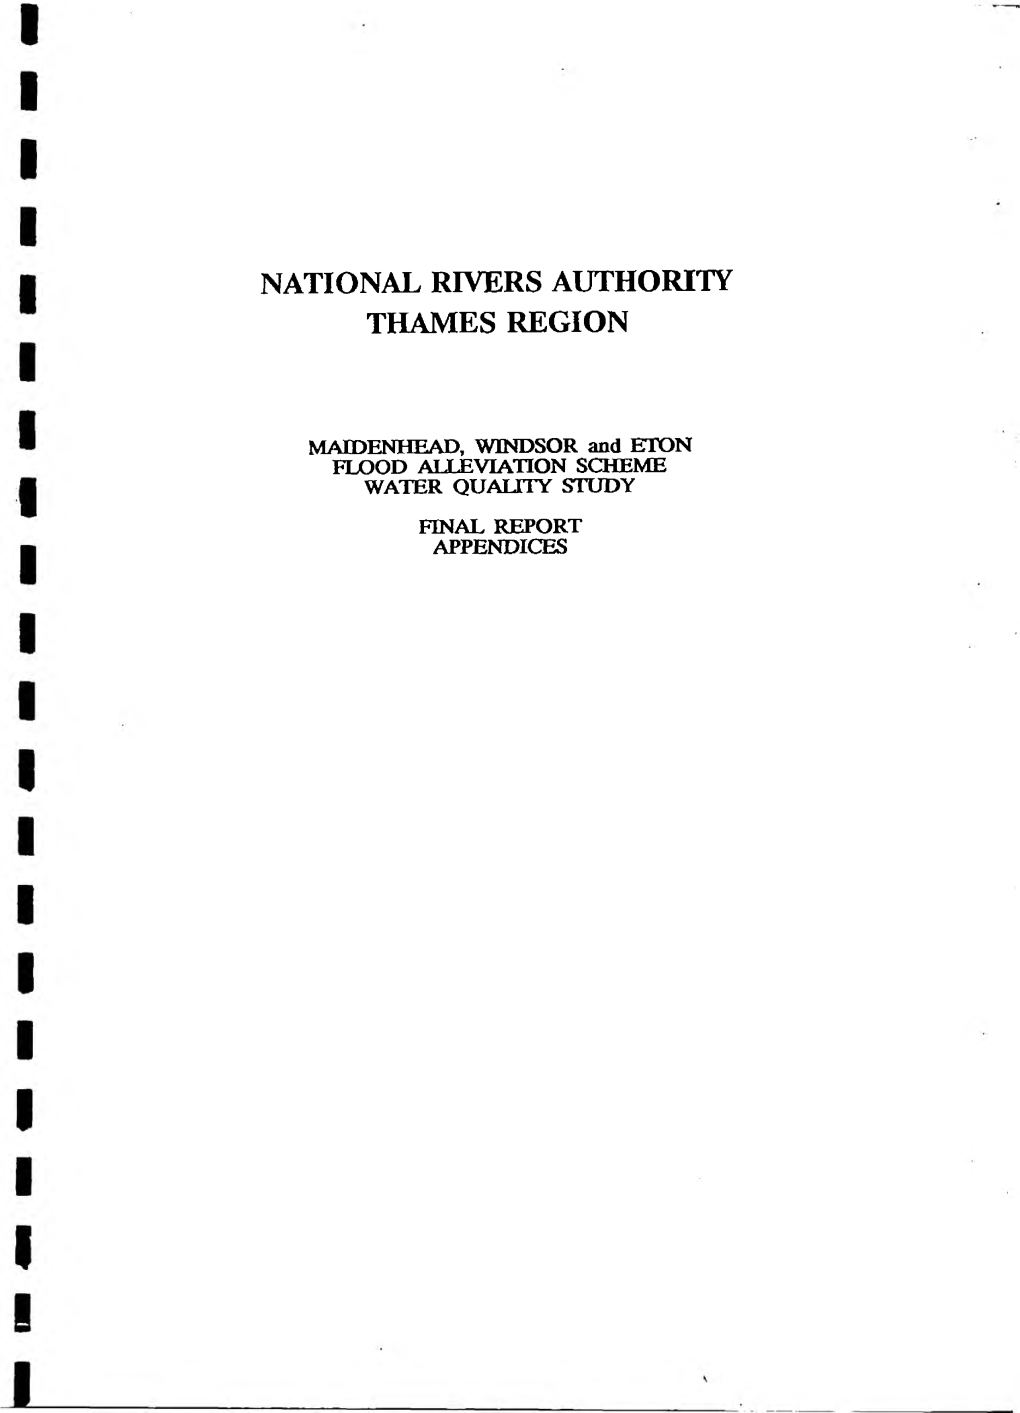 National Rivers Authority Thames Region